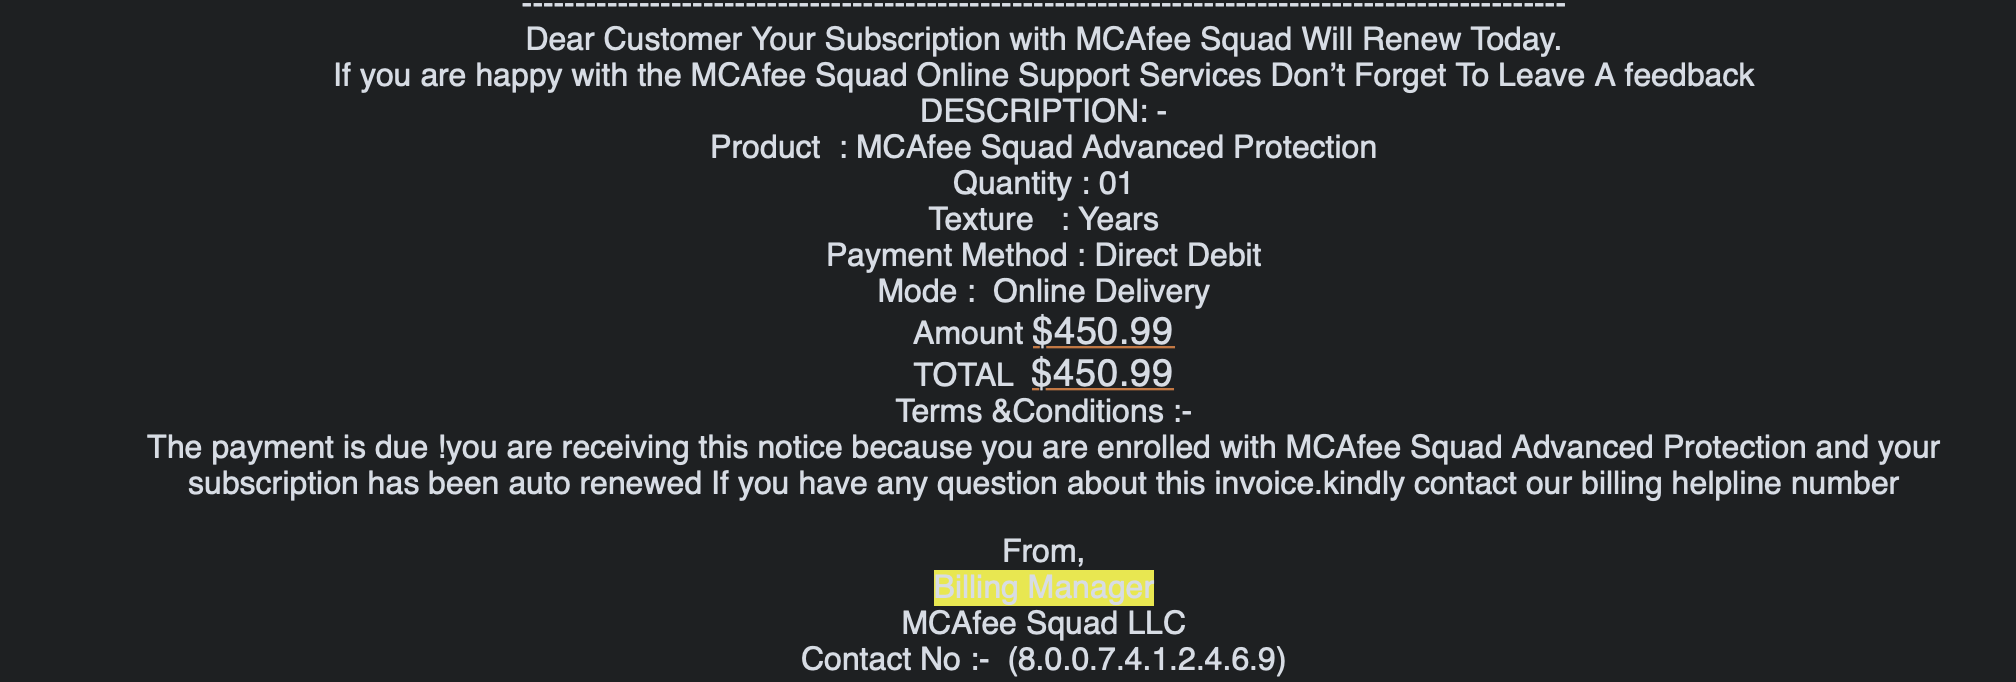 MCAfee Squad Support Scam 800-741-2469